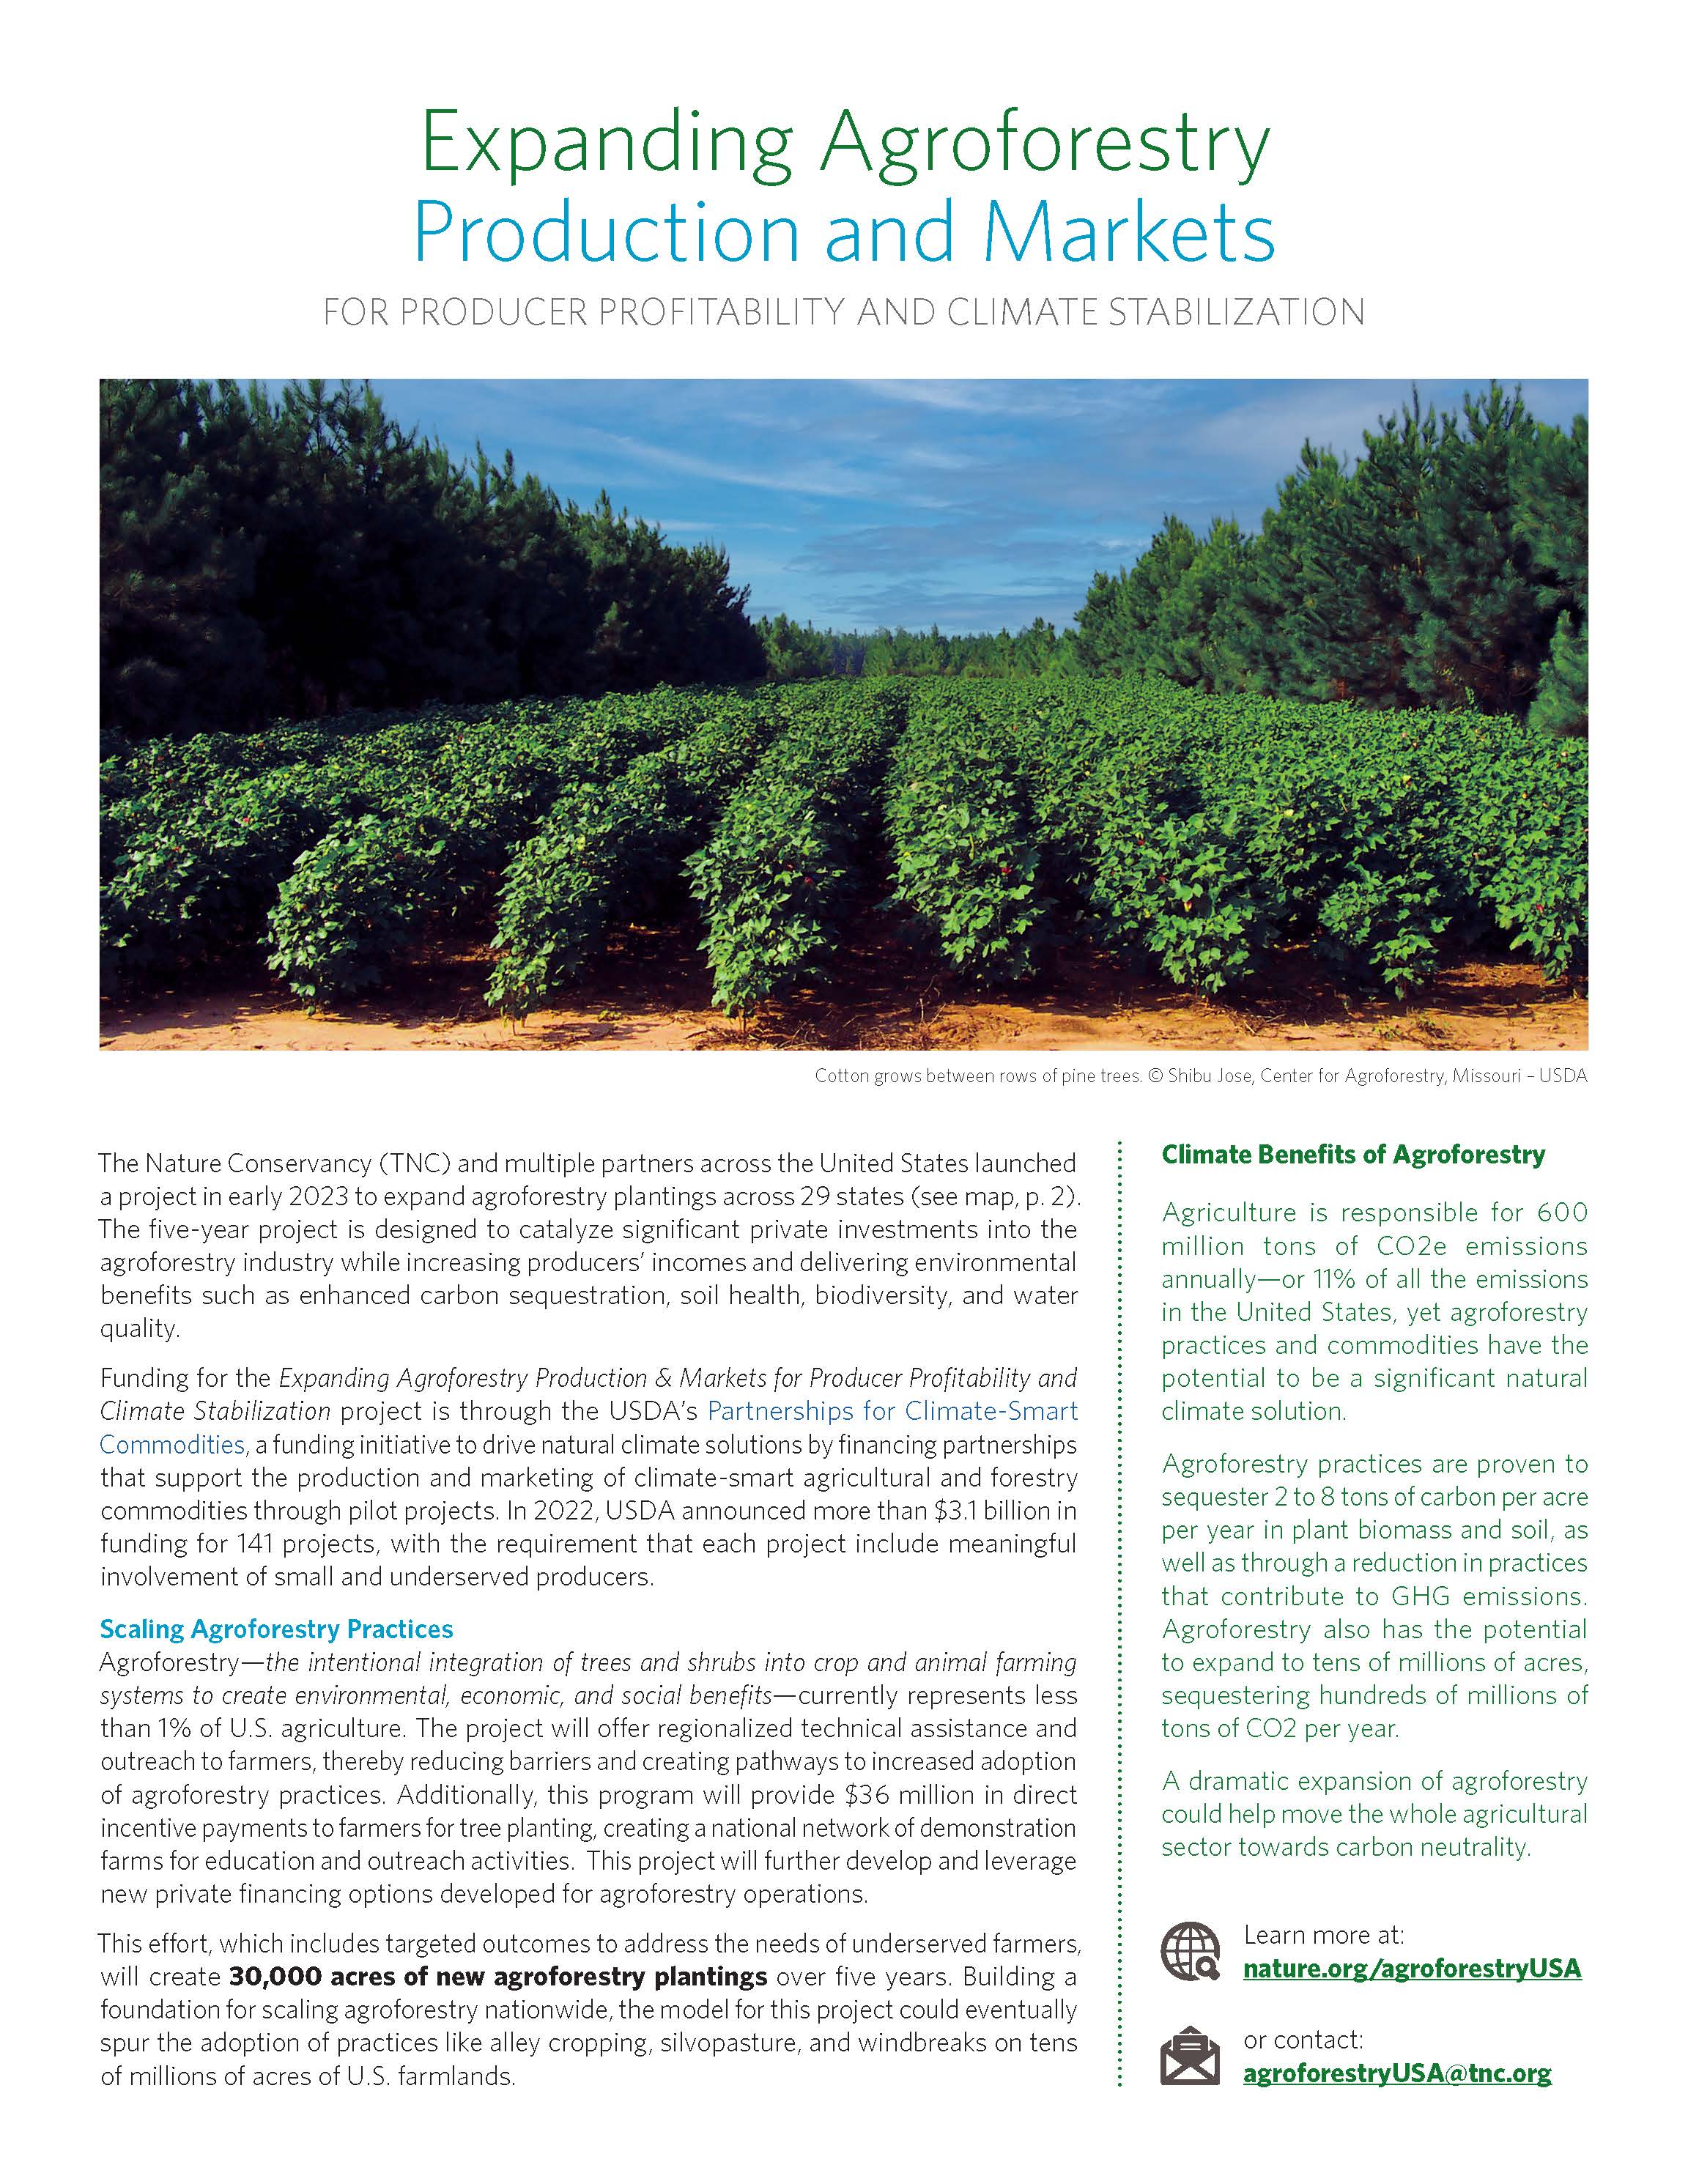 A fact sheet about the Expanding Agroforestry Production and Markets program.